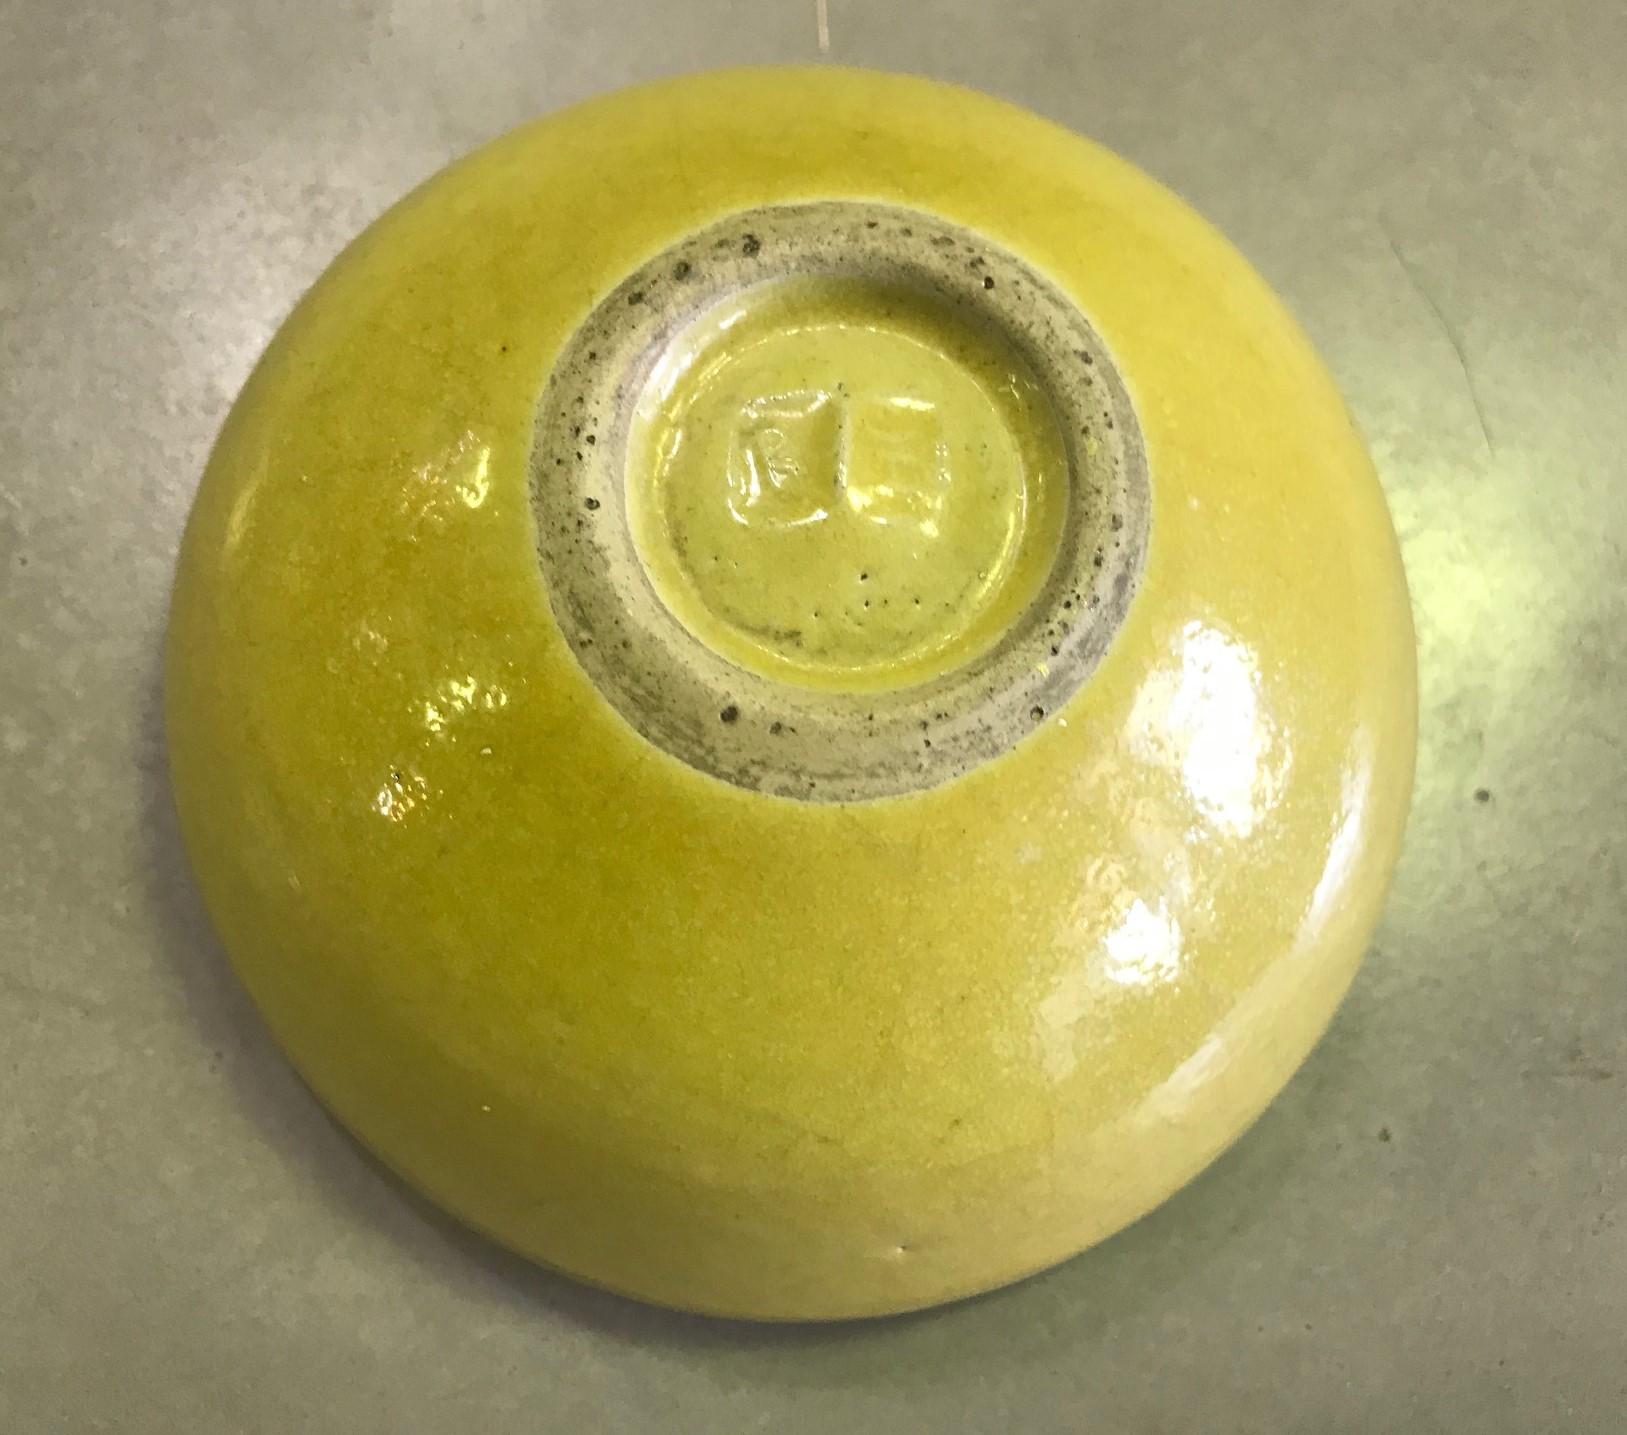 Mid-20th Century Lucie Rie & Hans Coper Signed Stamped Yellow Glazed Stoneware Bowl, circa 1950 For Sale